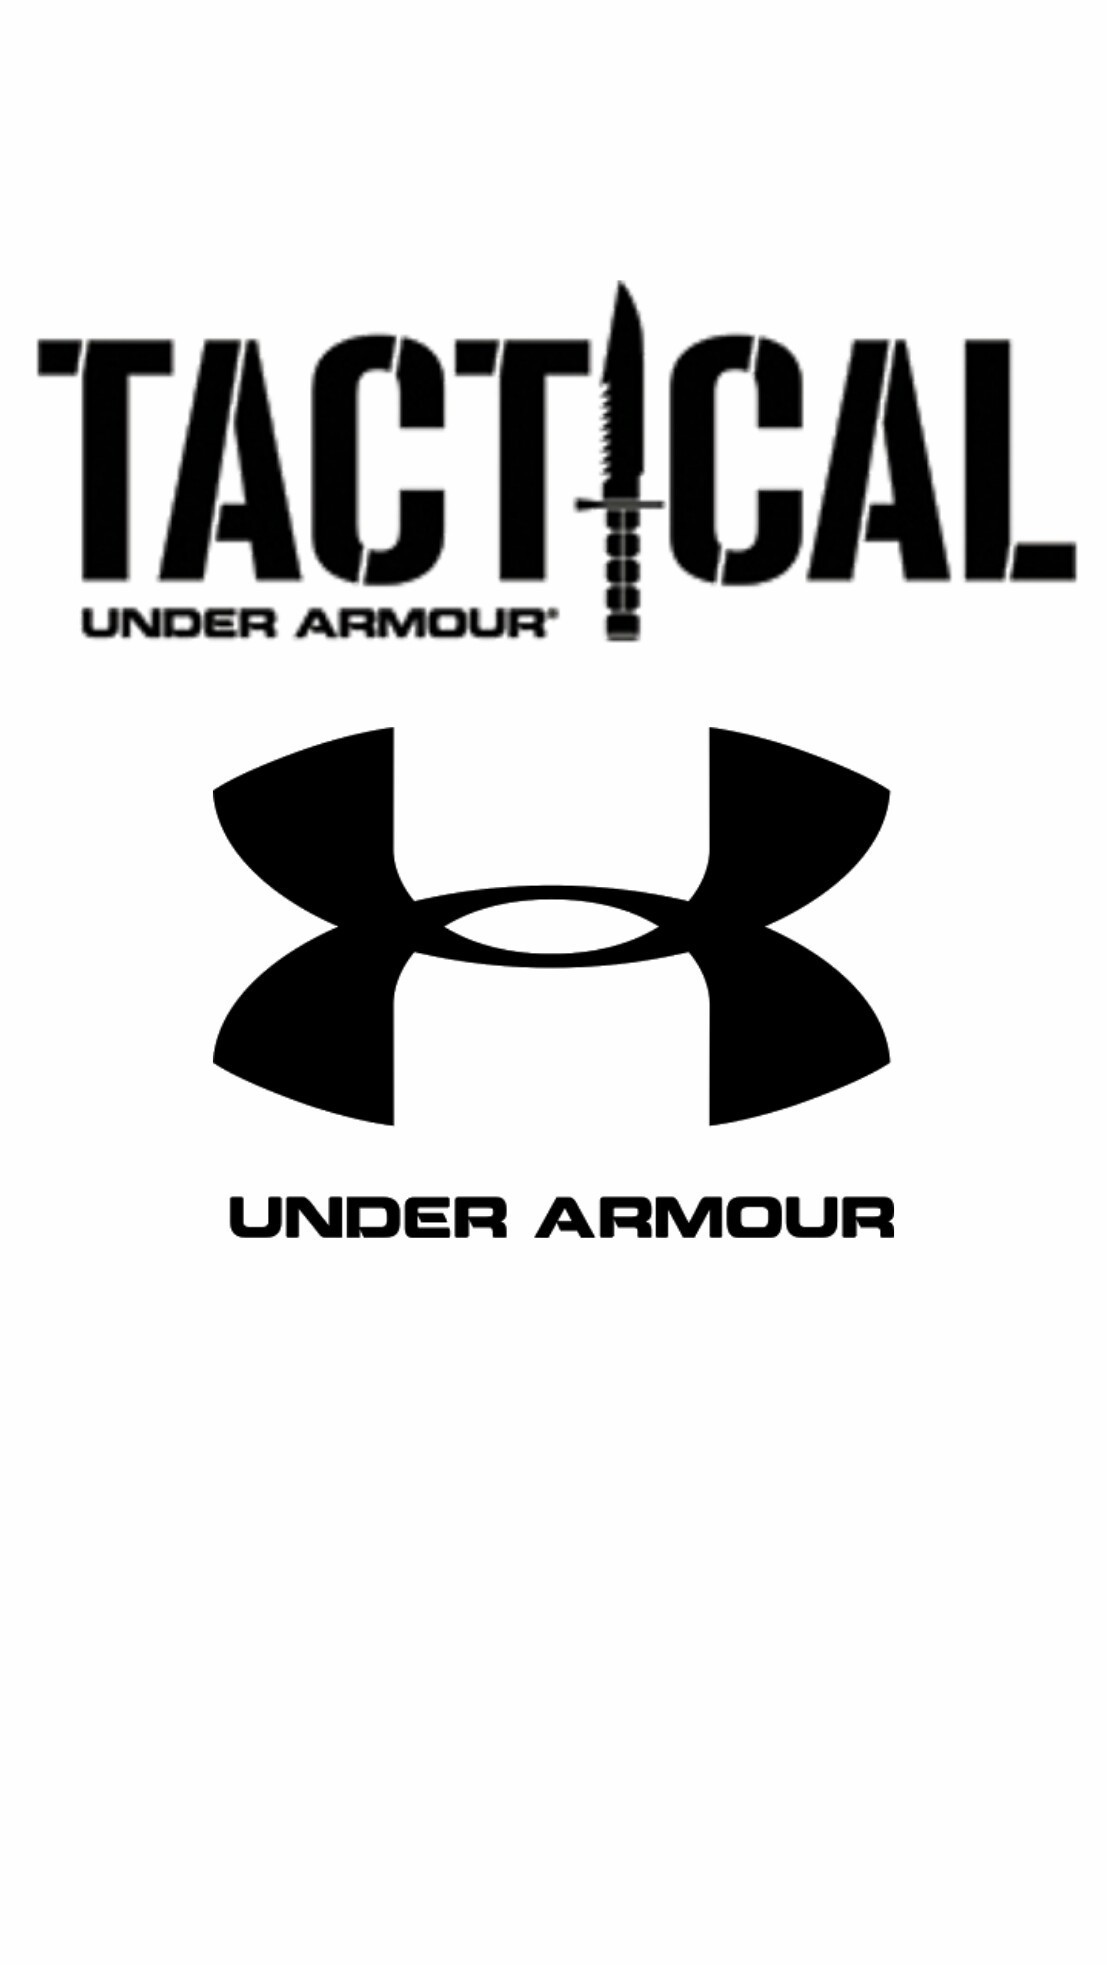 1107x1965 Title : under armour wallpaper hd (76+ images) Dimension : 1107 x 1965.  File Type : JPG/JPEG